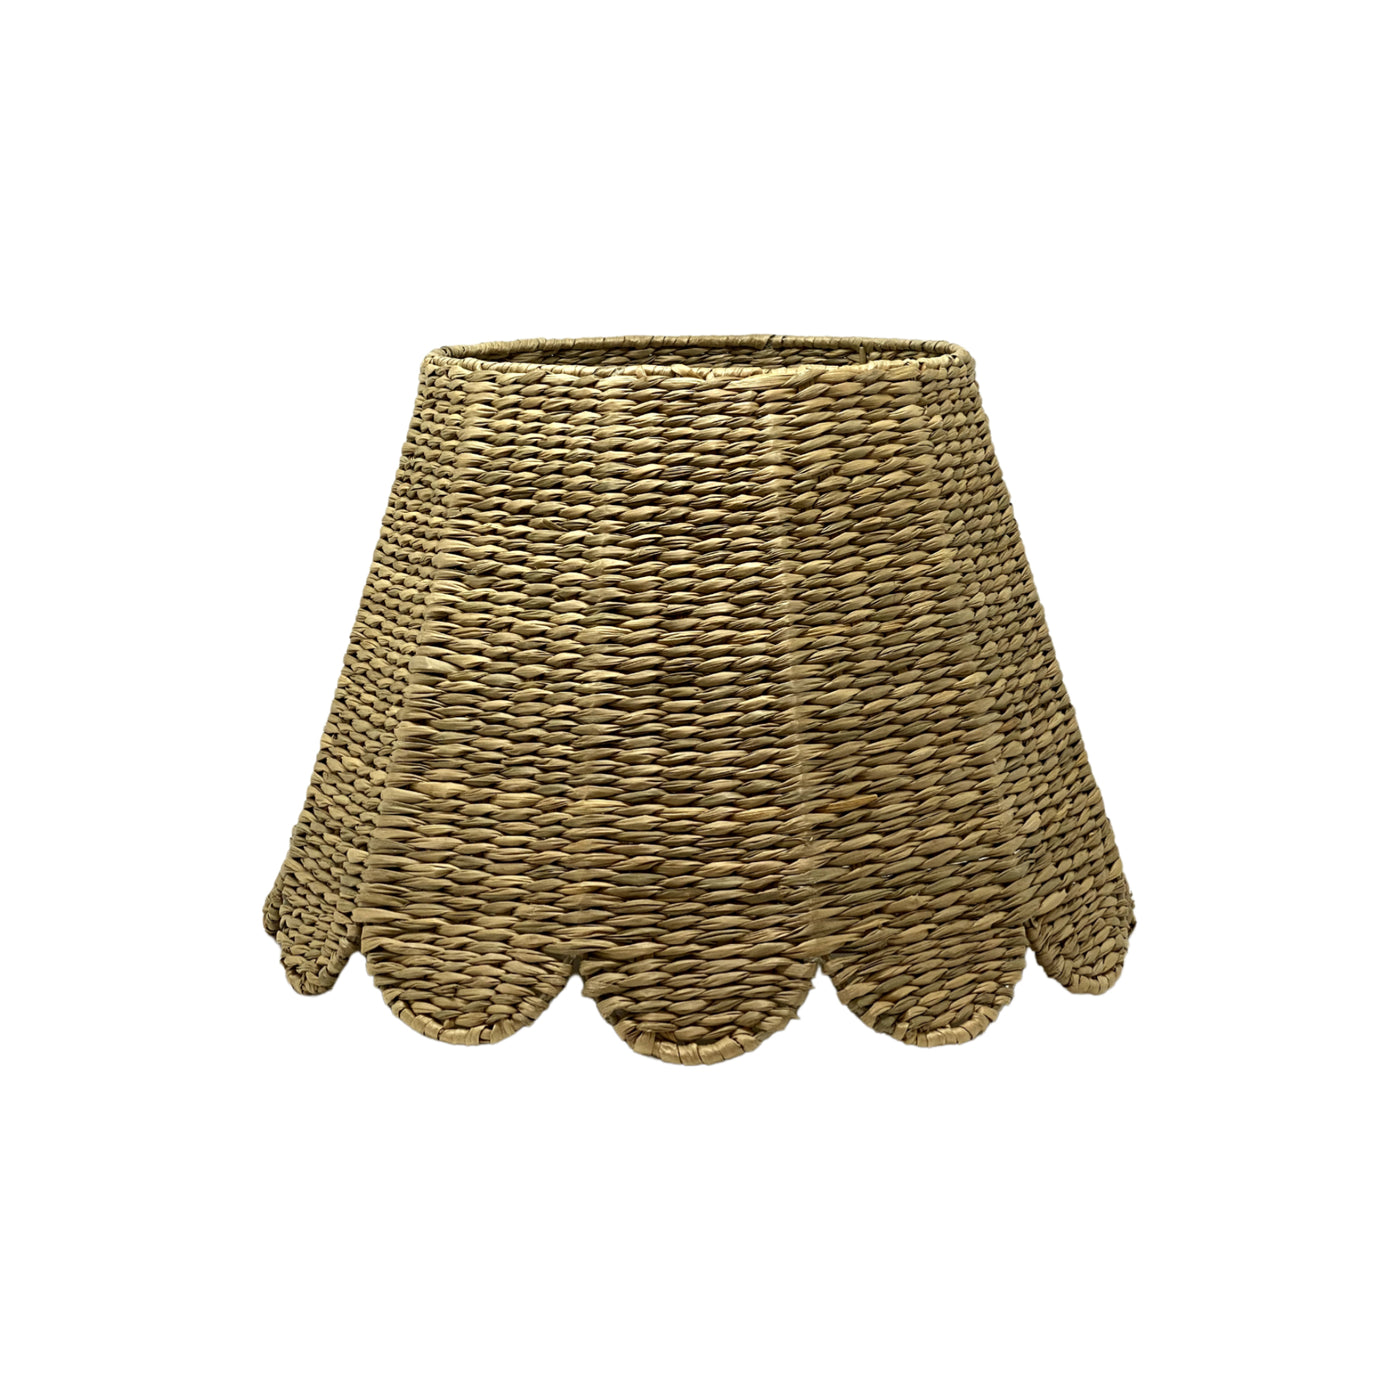 Scalloped Seagrass Lampshade